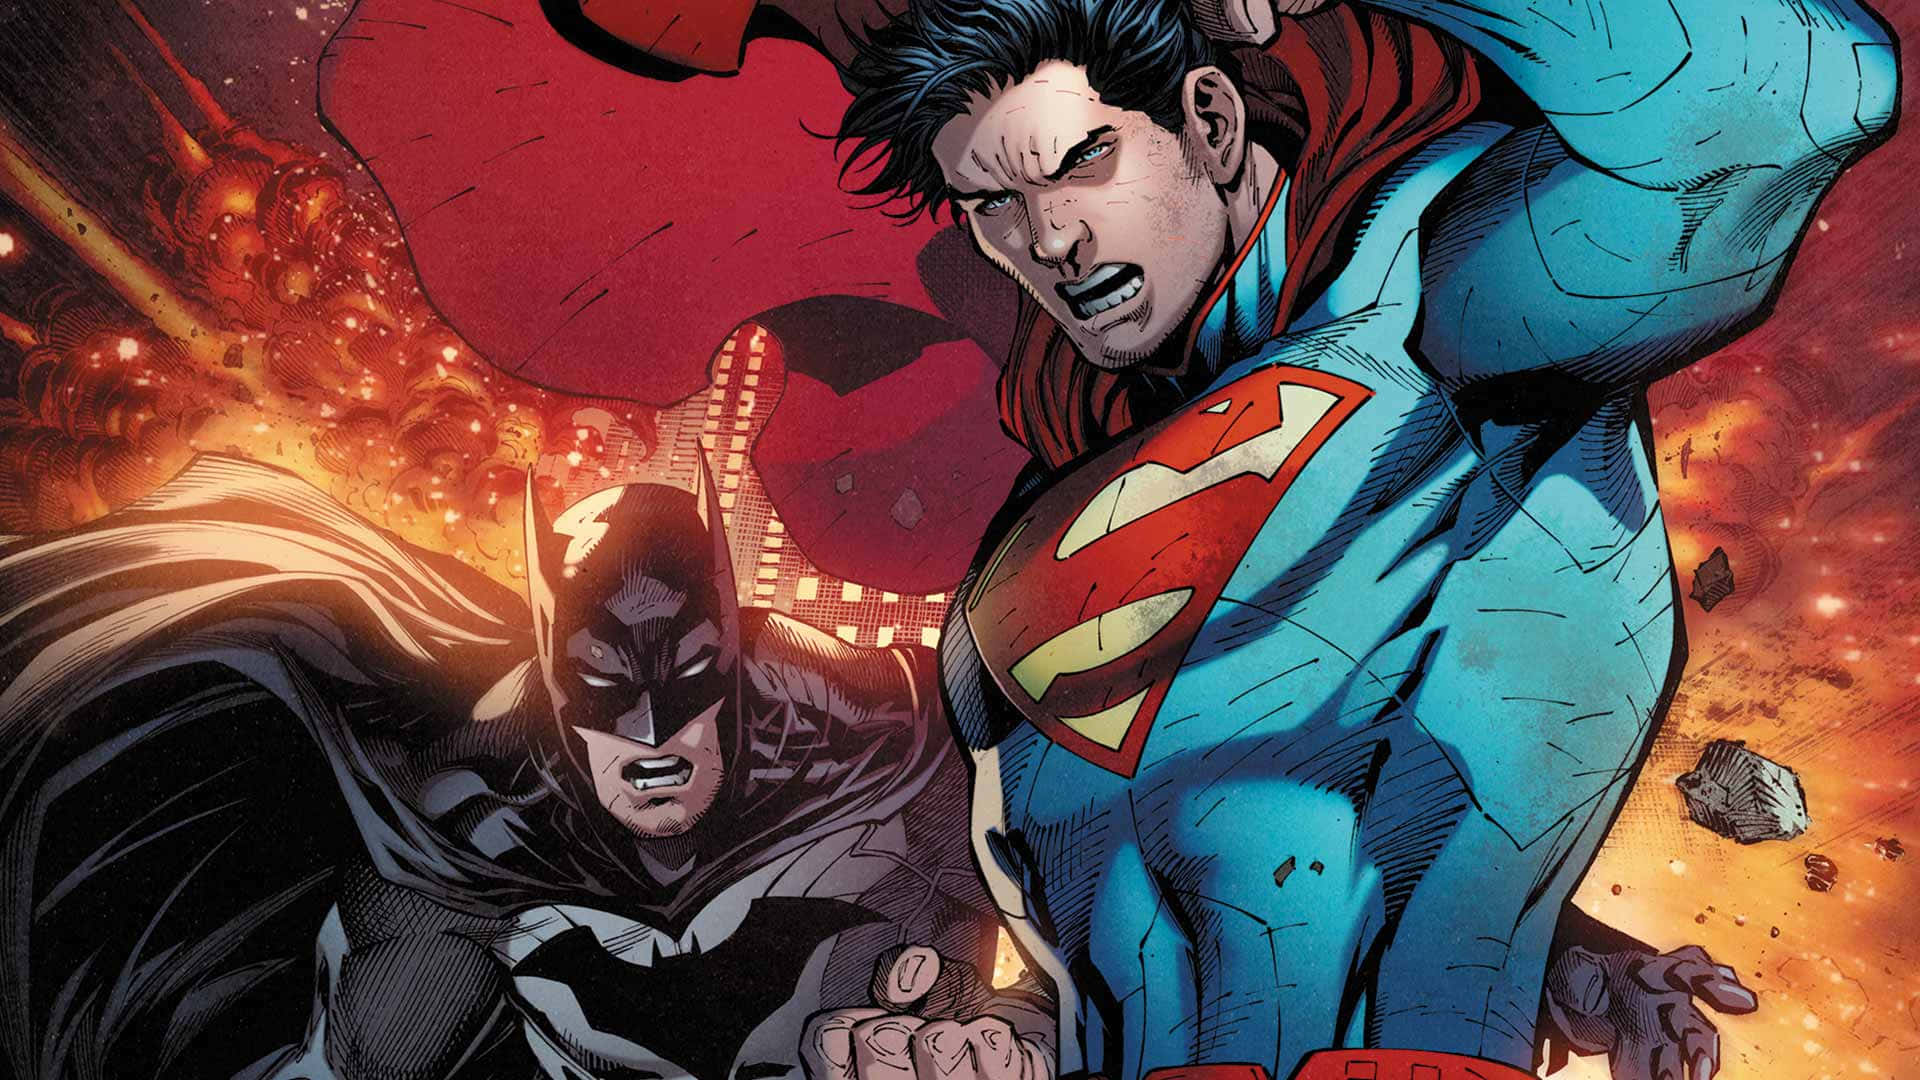 Superman And Batman Fighting In Front Of Fire